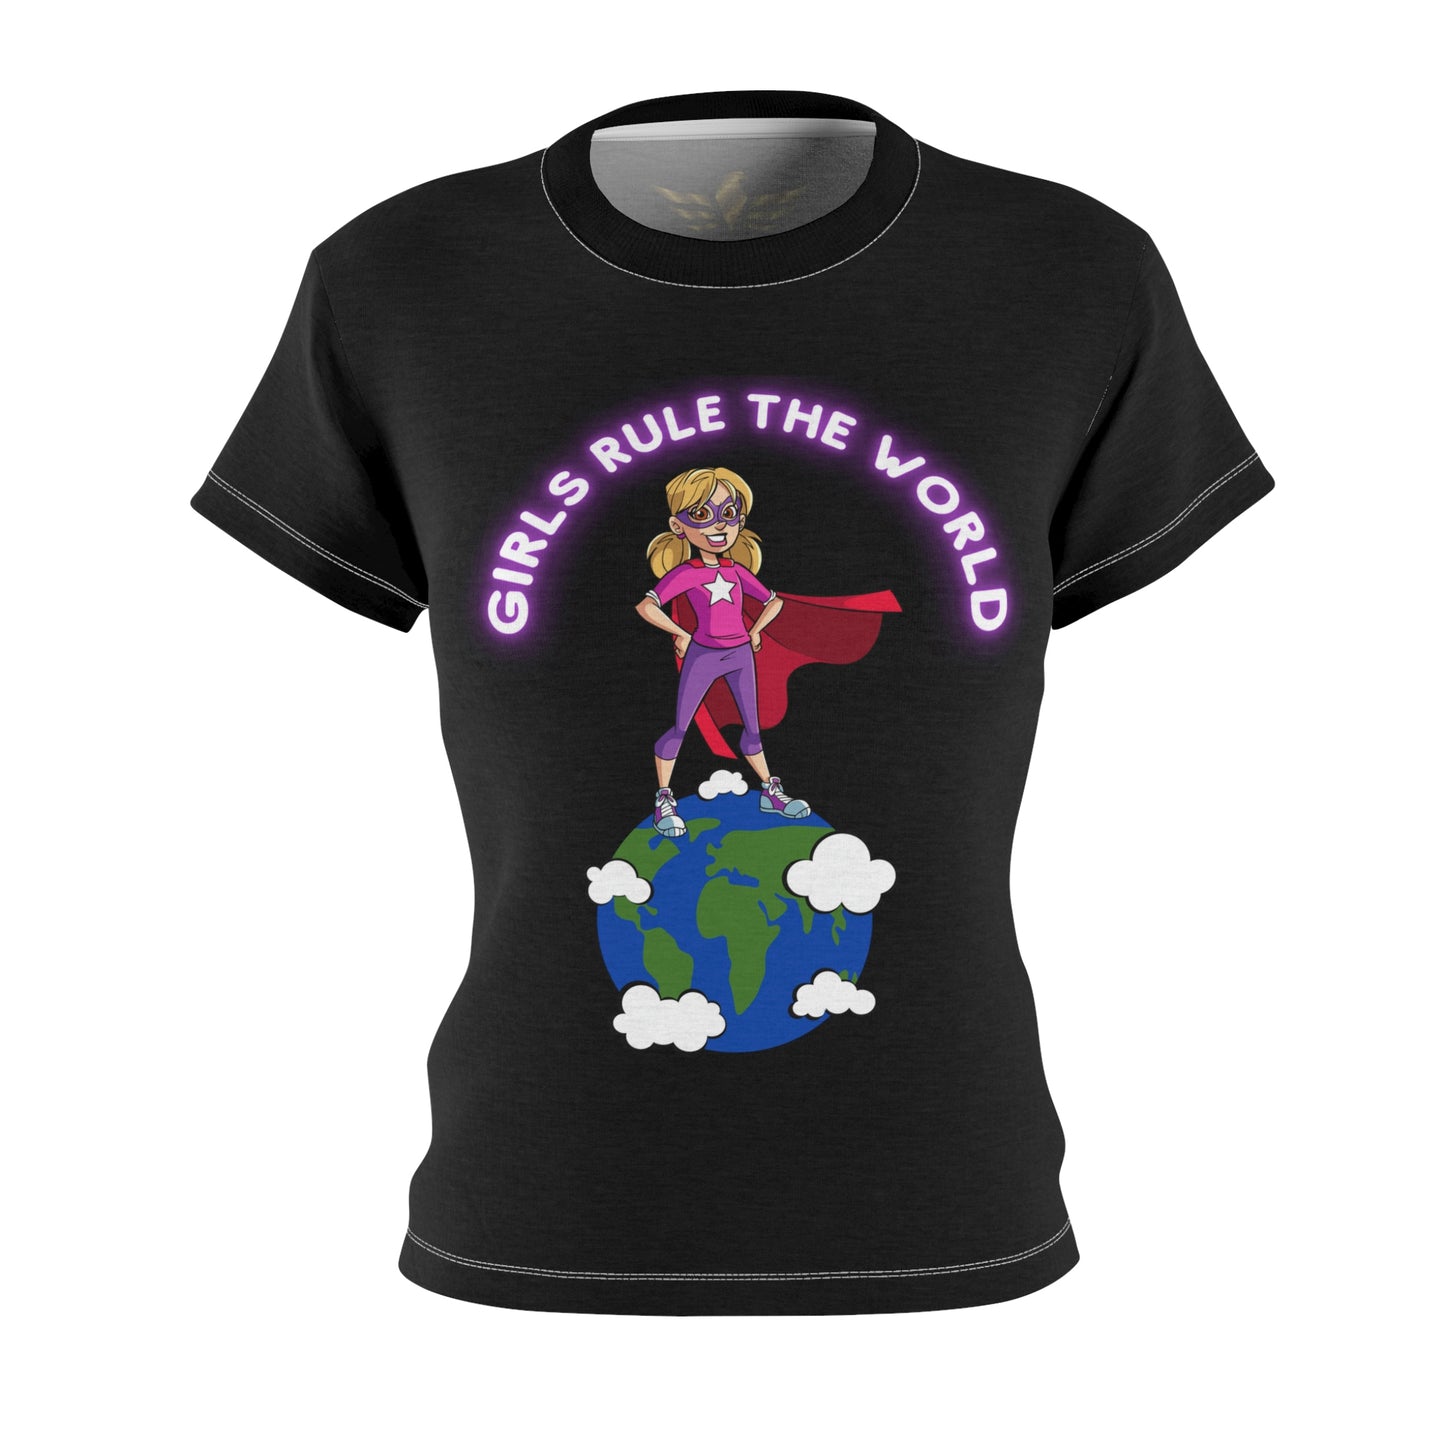 Premium AH Vision Girls Rule The World Tee Designed By Aireona - AH VISION